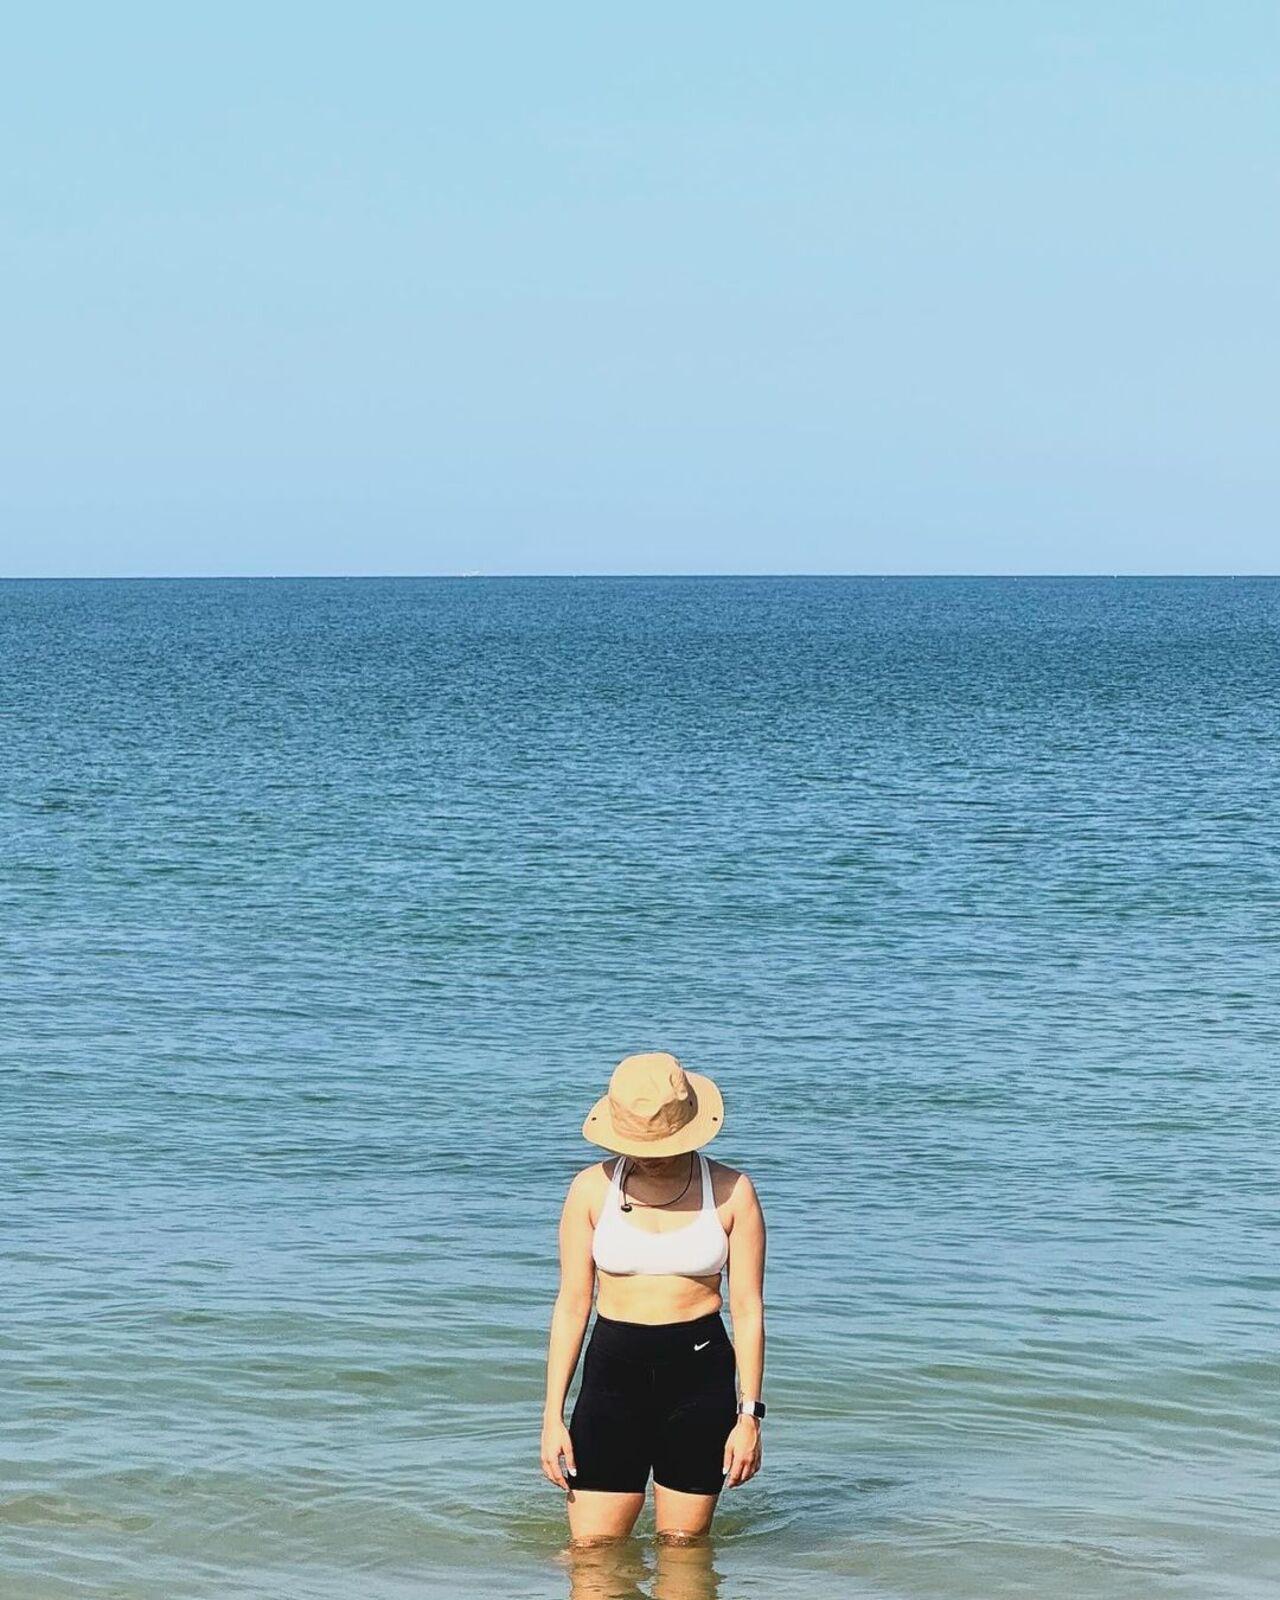 She also went for a swim to beat the heat and posed alongside the shore wearing a hat. 